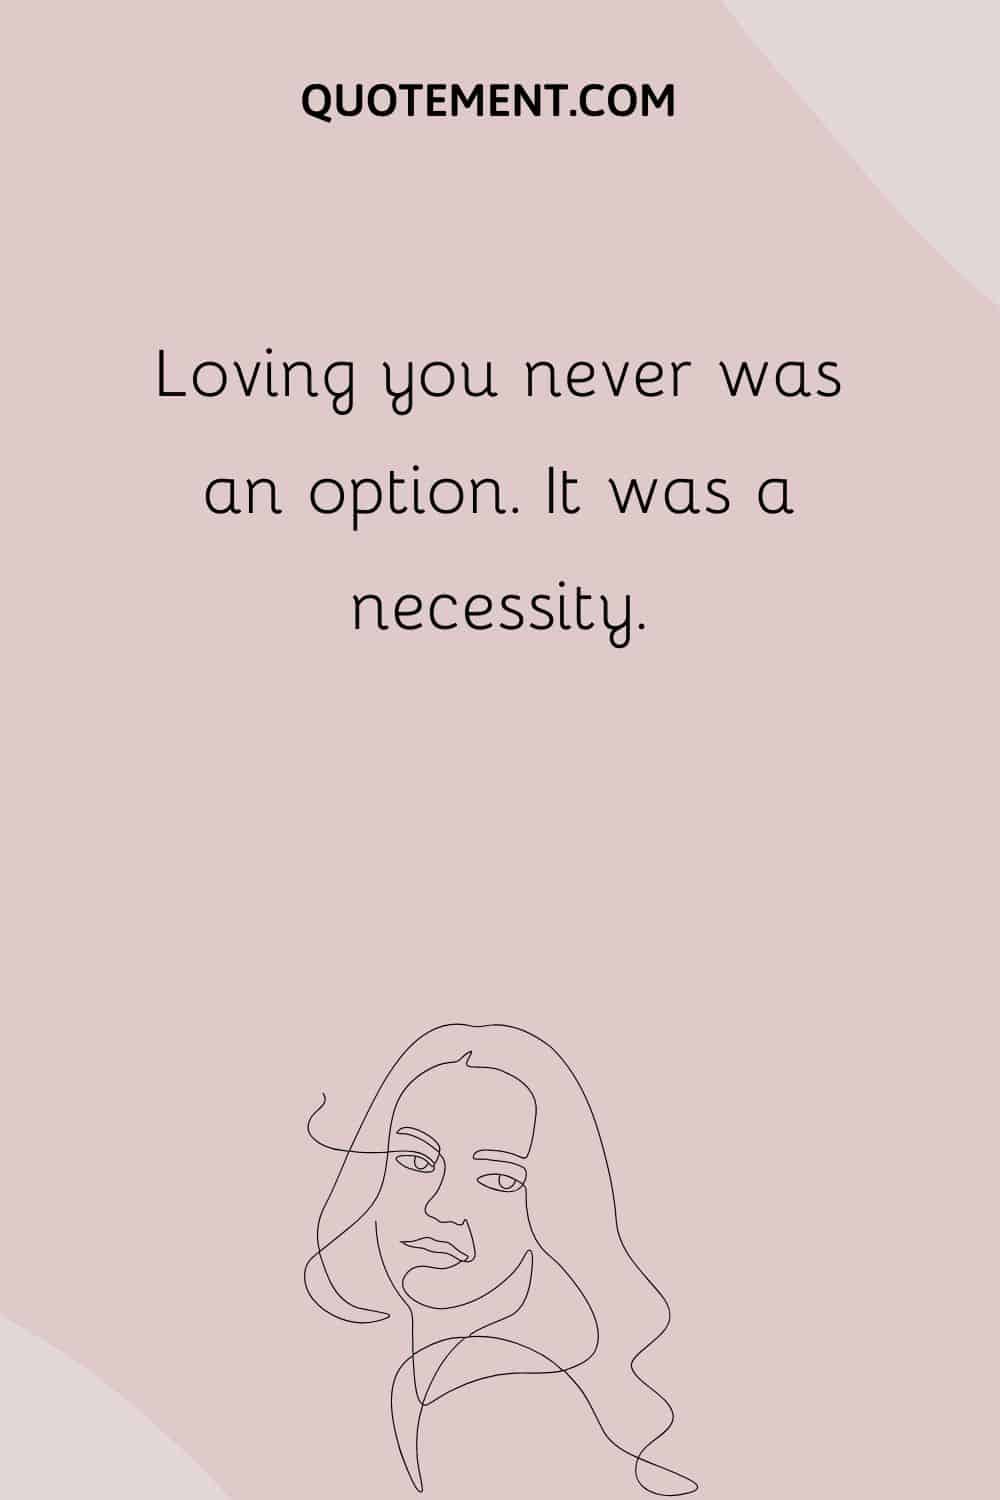 Loving you never was an option. It was a necessity.